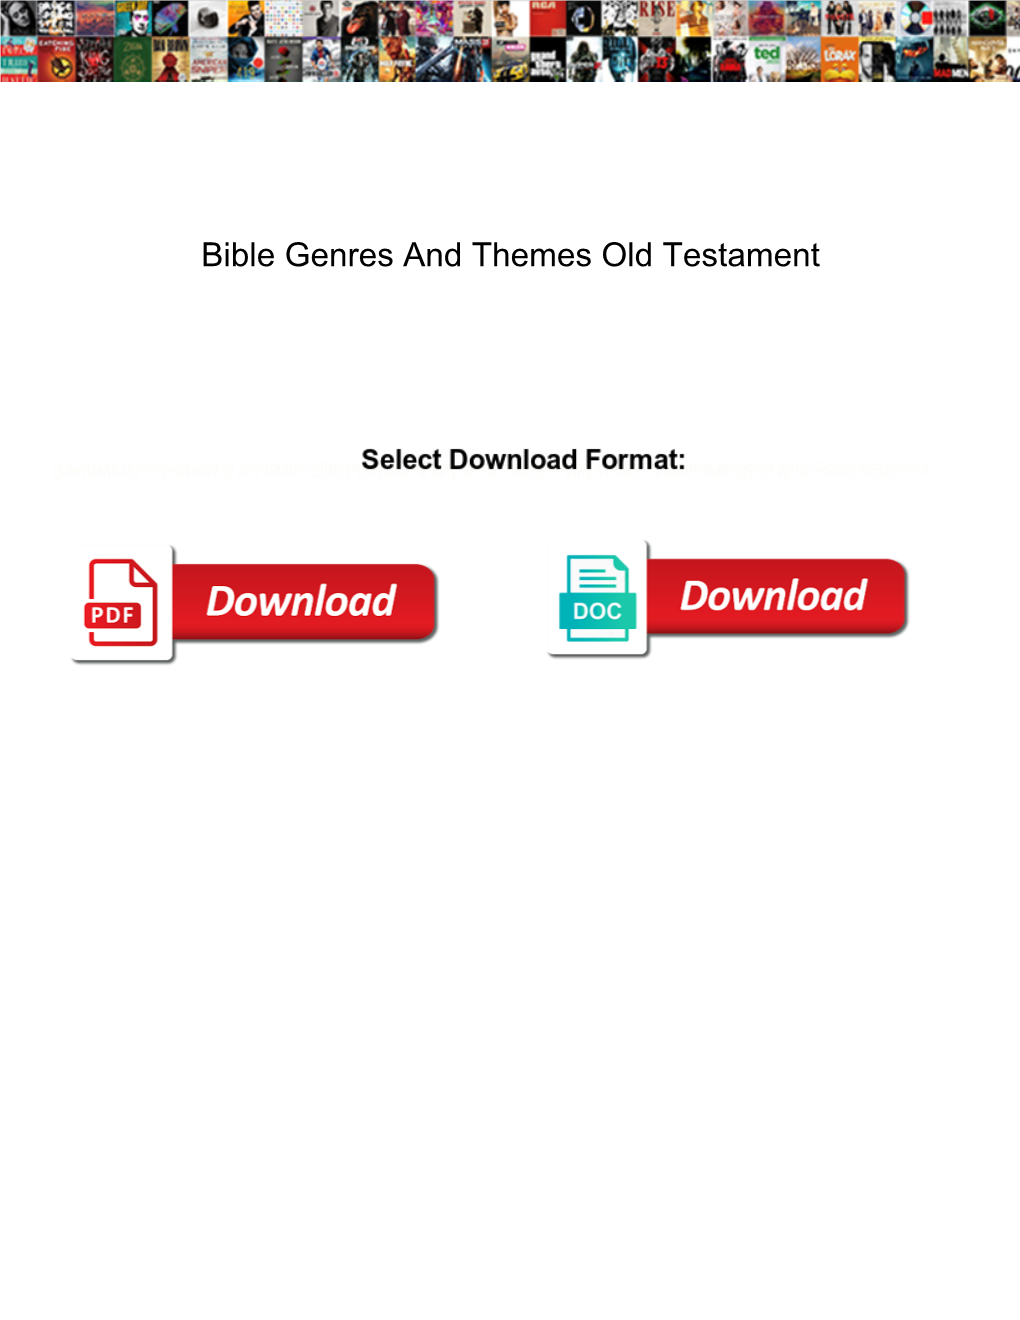 Bible Genres and Themes Old Testament